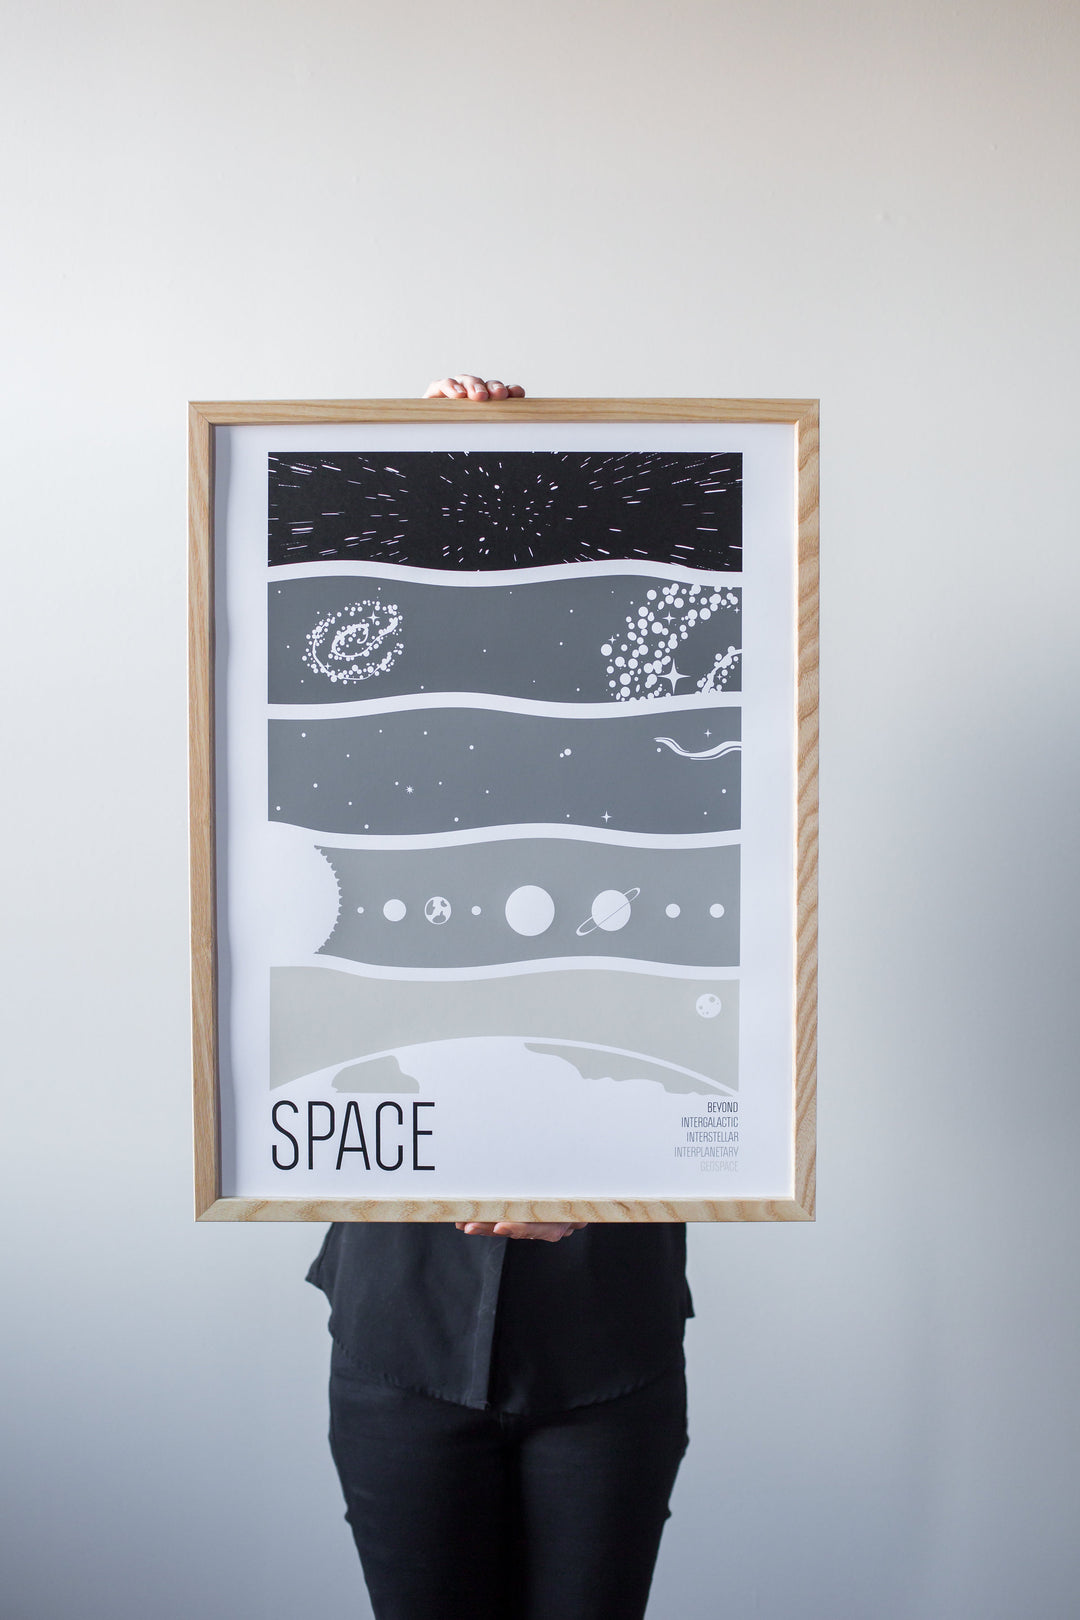 Space Print by Brainstorm - Outer Space! Geospace, Interplanetary, Interstellar, Intergalactic, Beyond